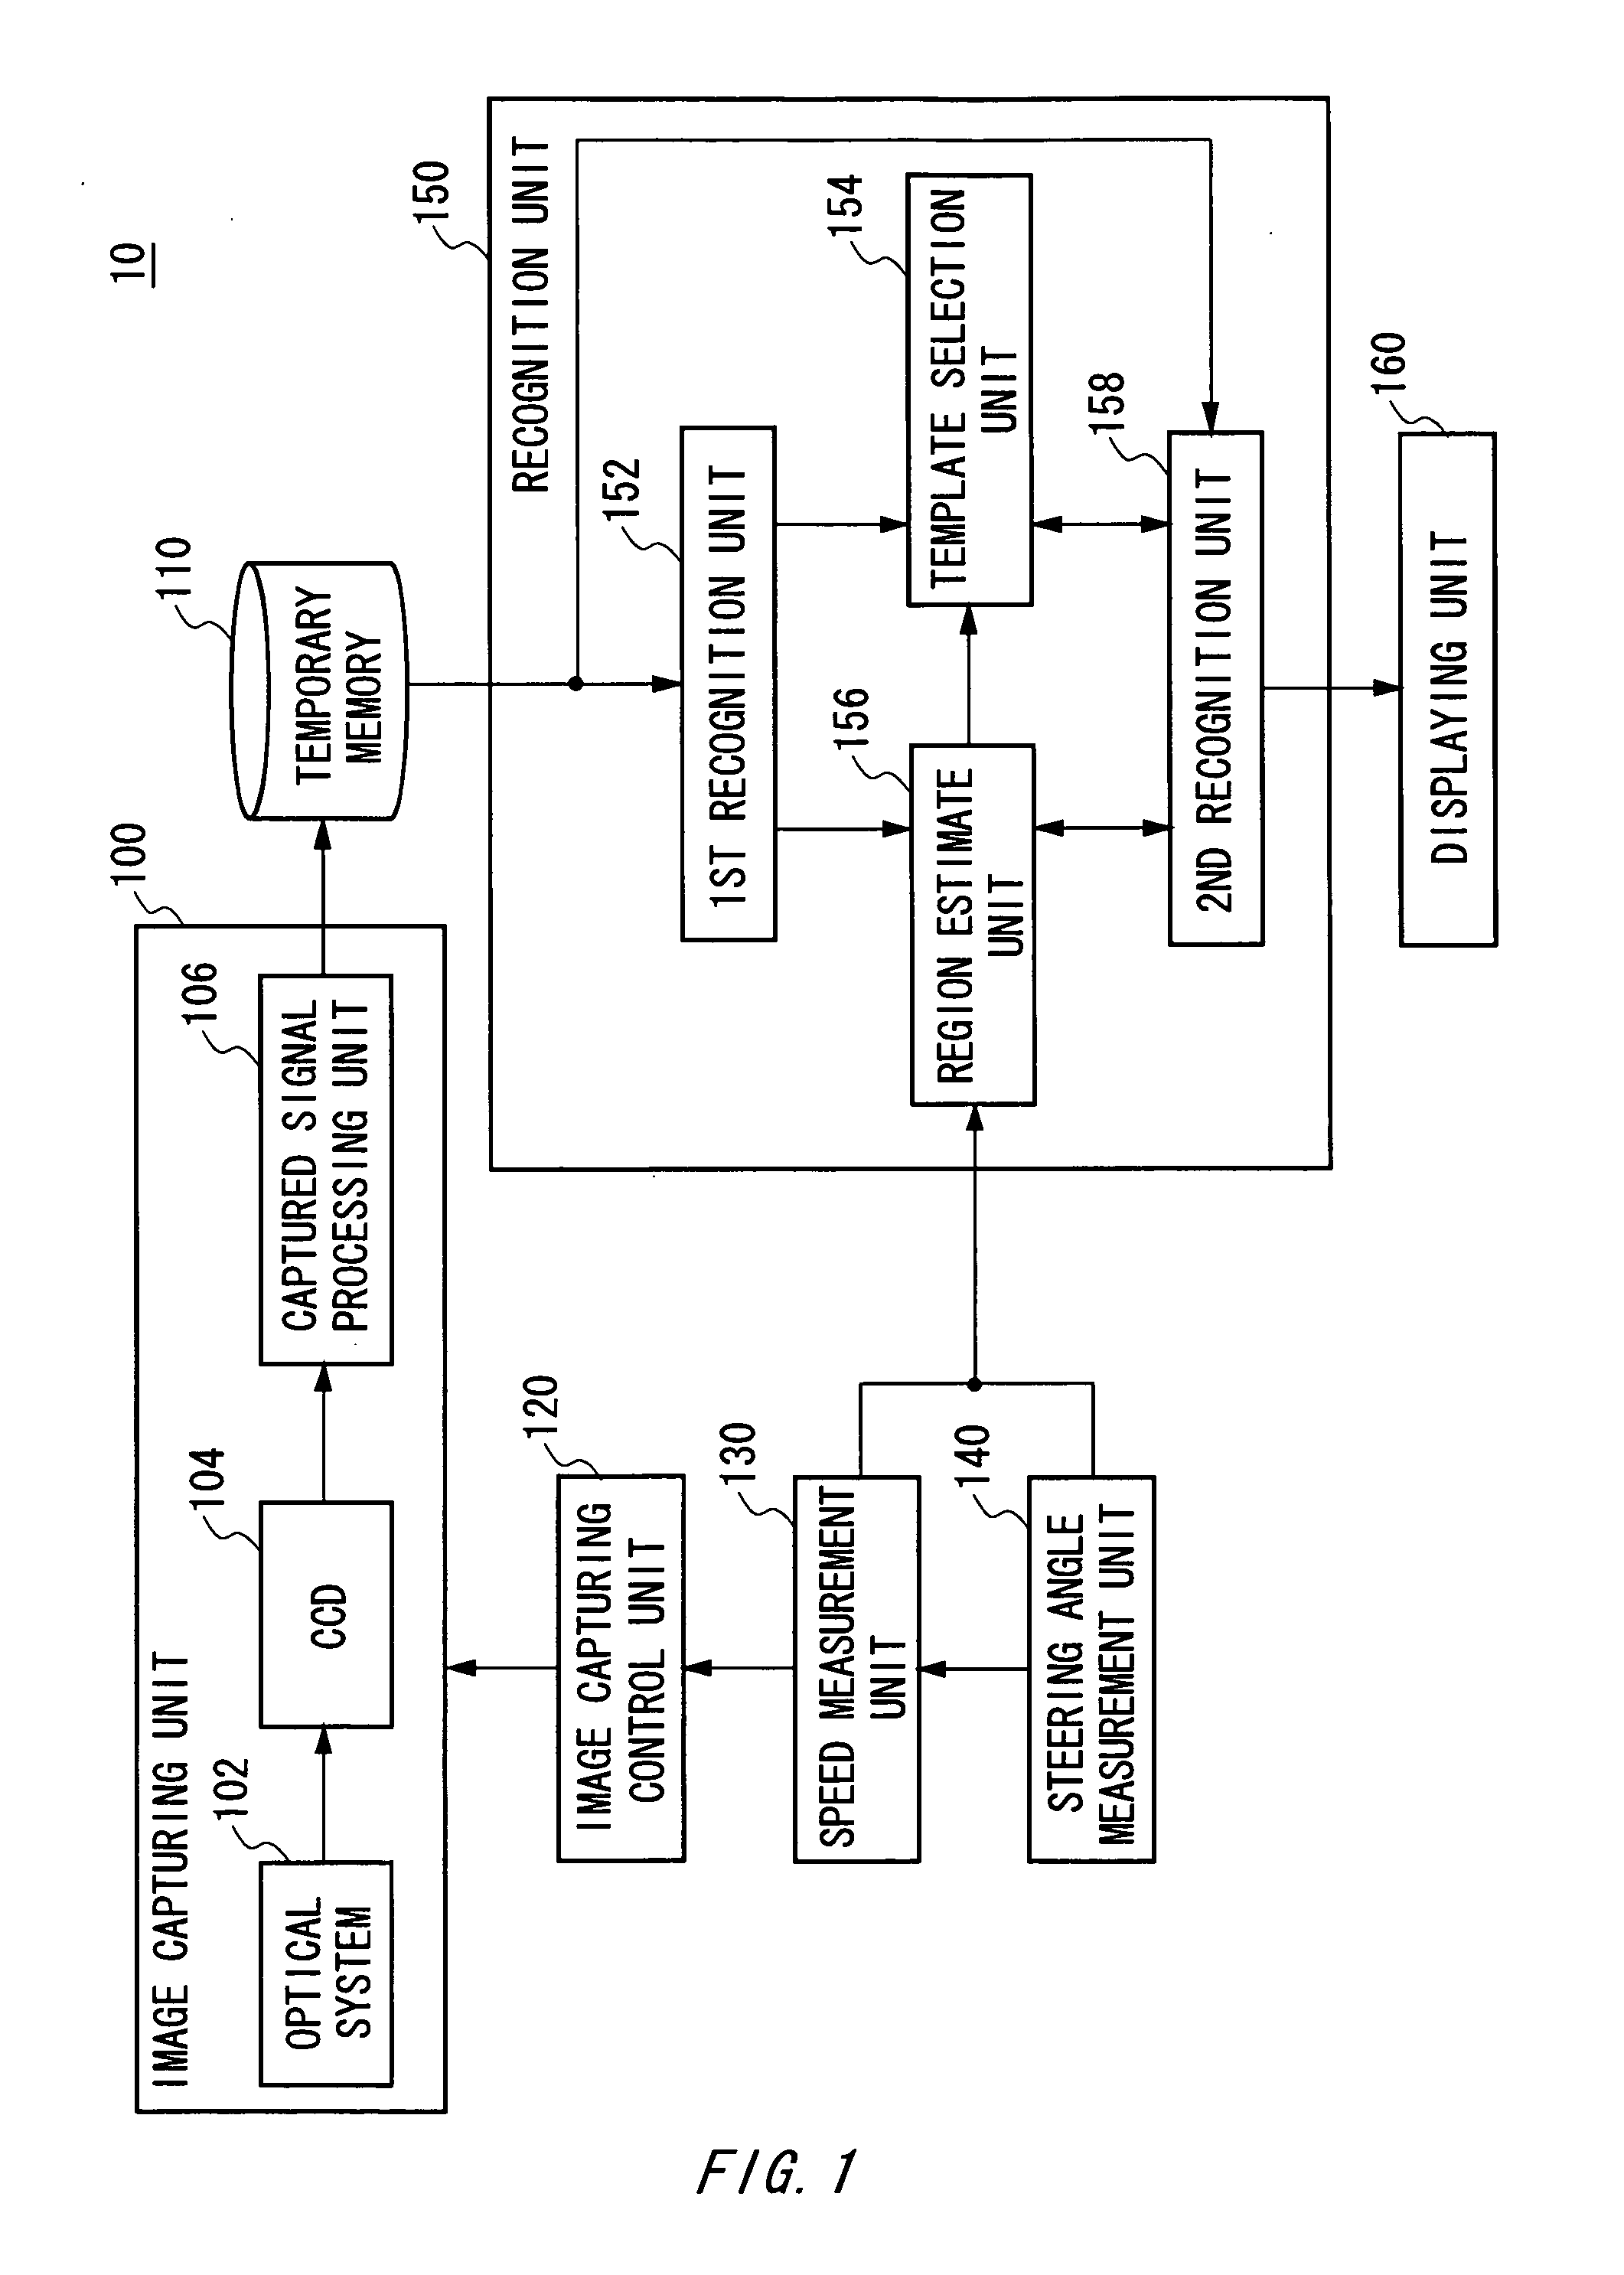 Image recognition system, image recognition method, and machine readable medium storing thereon an image recognition program